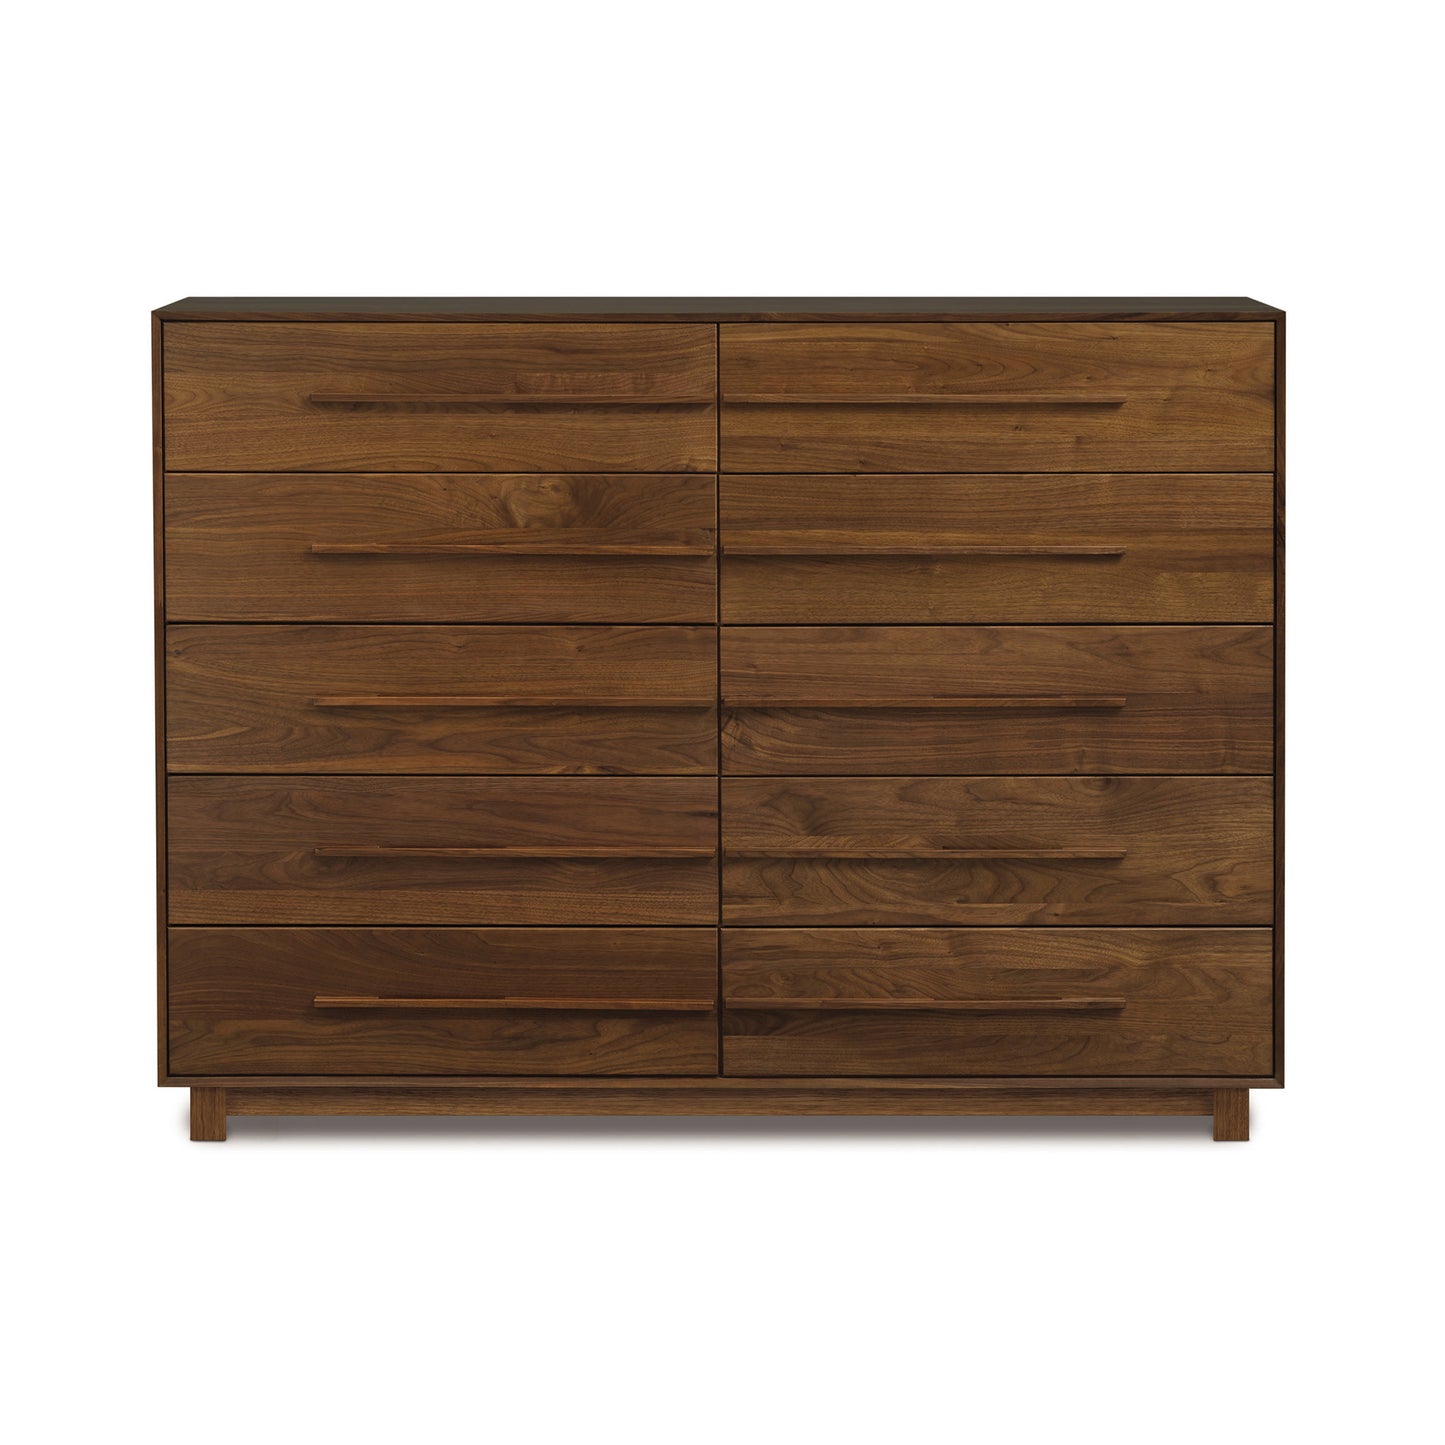 The Copeland Furniture Sloane 10-Drawer Dresser is a contemporary wooden dresser that offers ample bedroom storage with its multiple drawers.